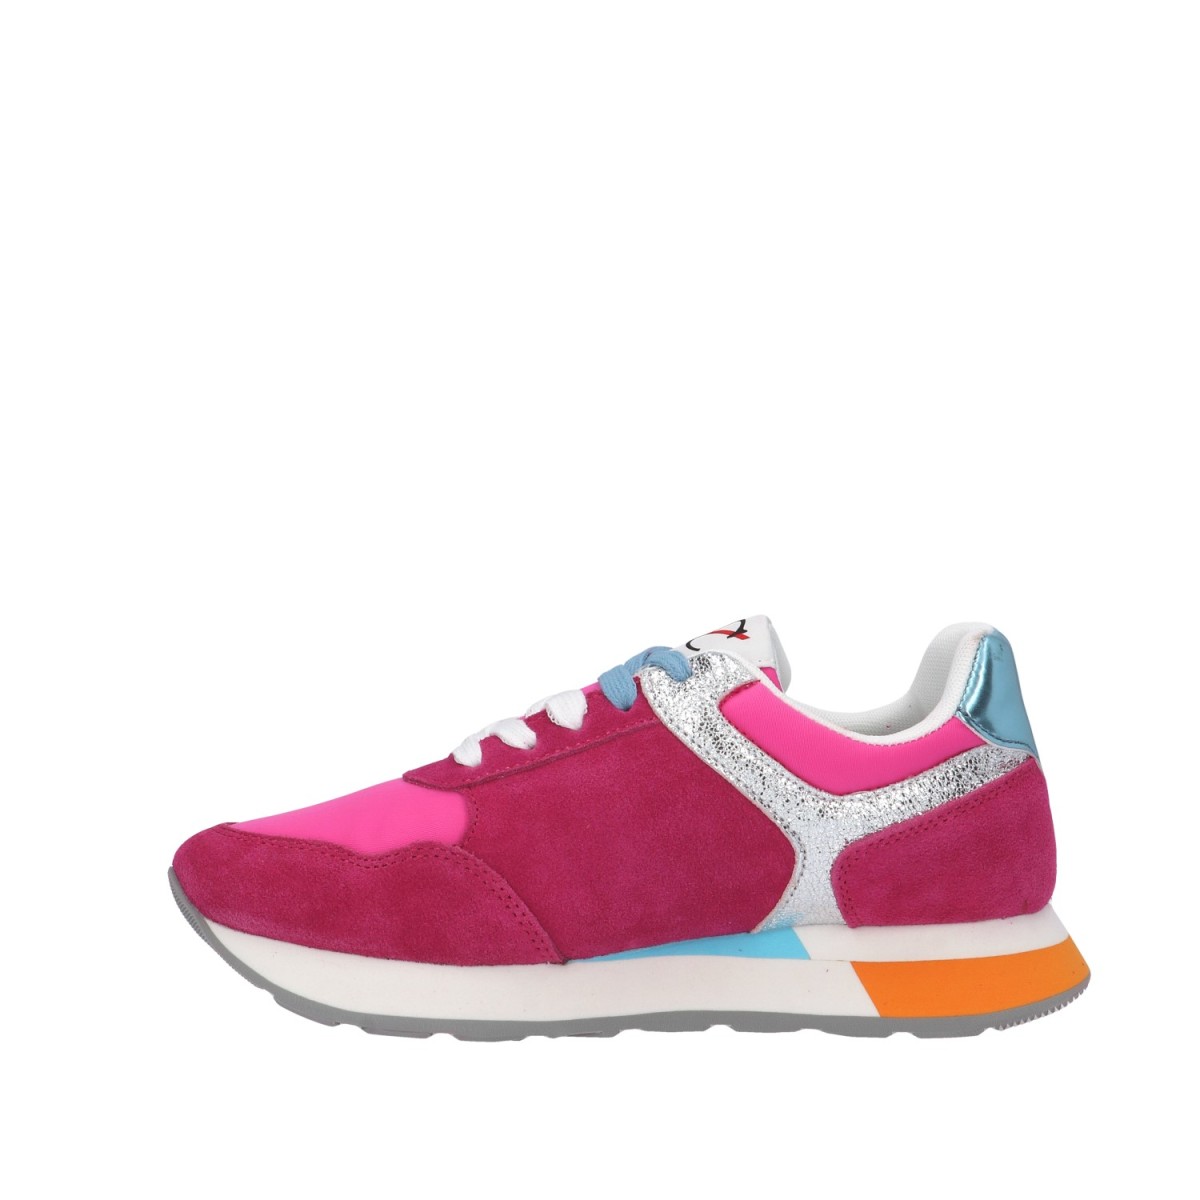 Cafenoir Sneaker Fuxia Gomma DB6030